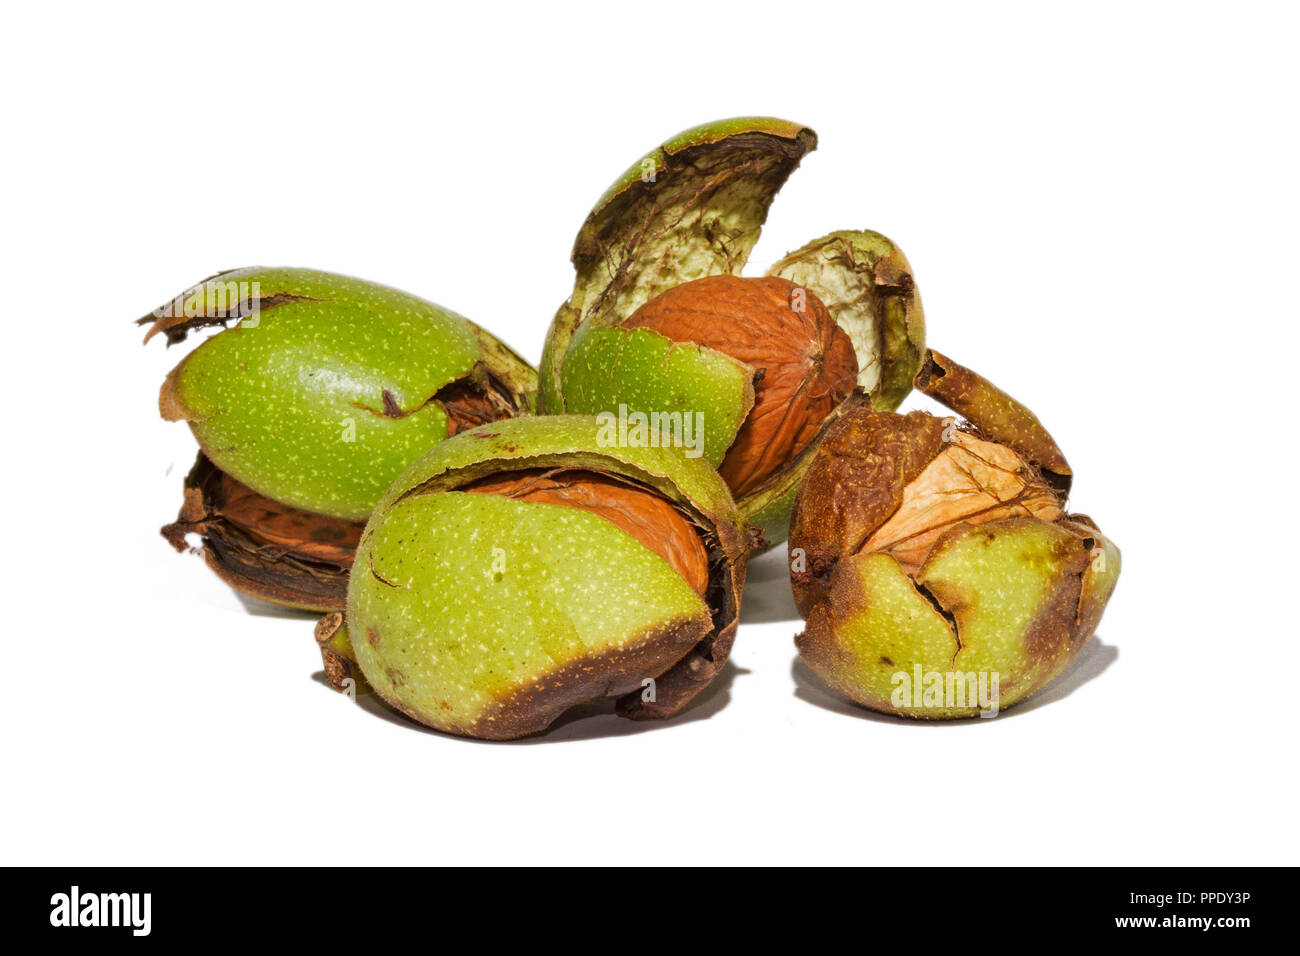 Ripe nuts of a Walnut tree, still in their husks, isolated on a white background Stock Photo